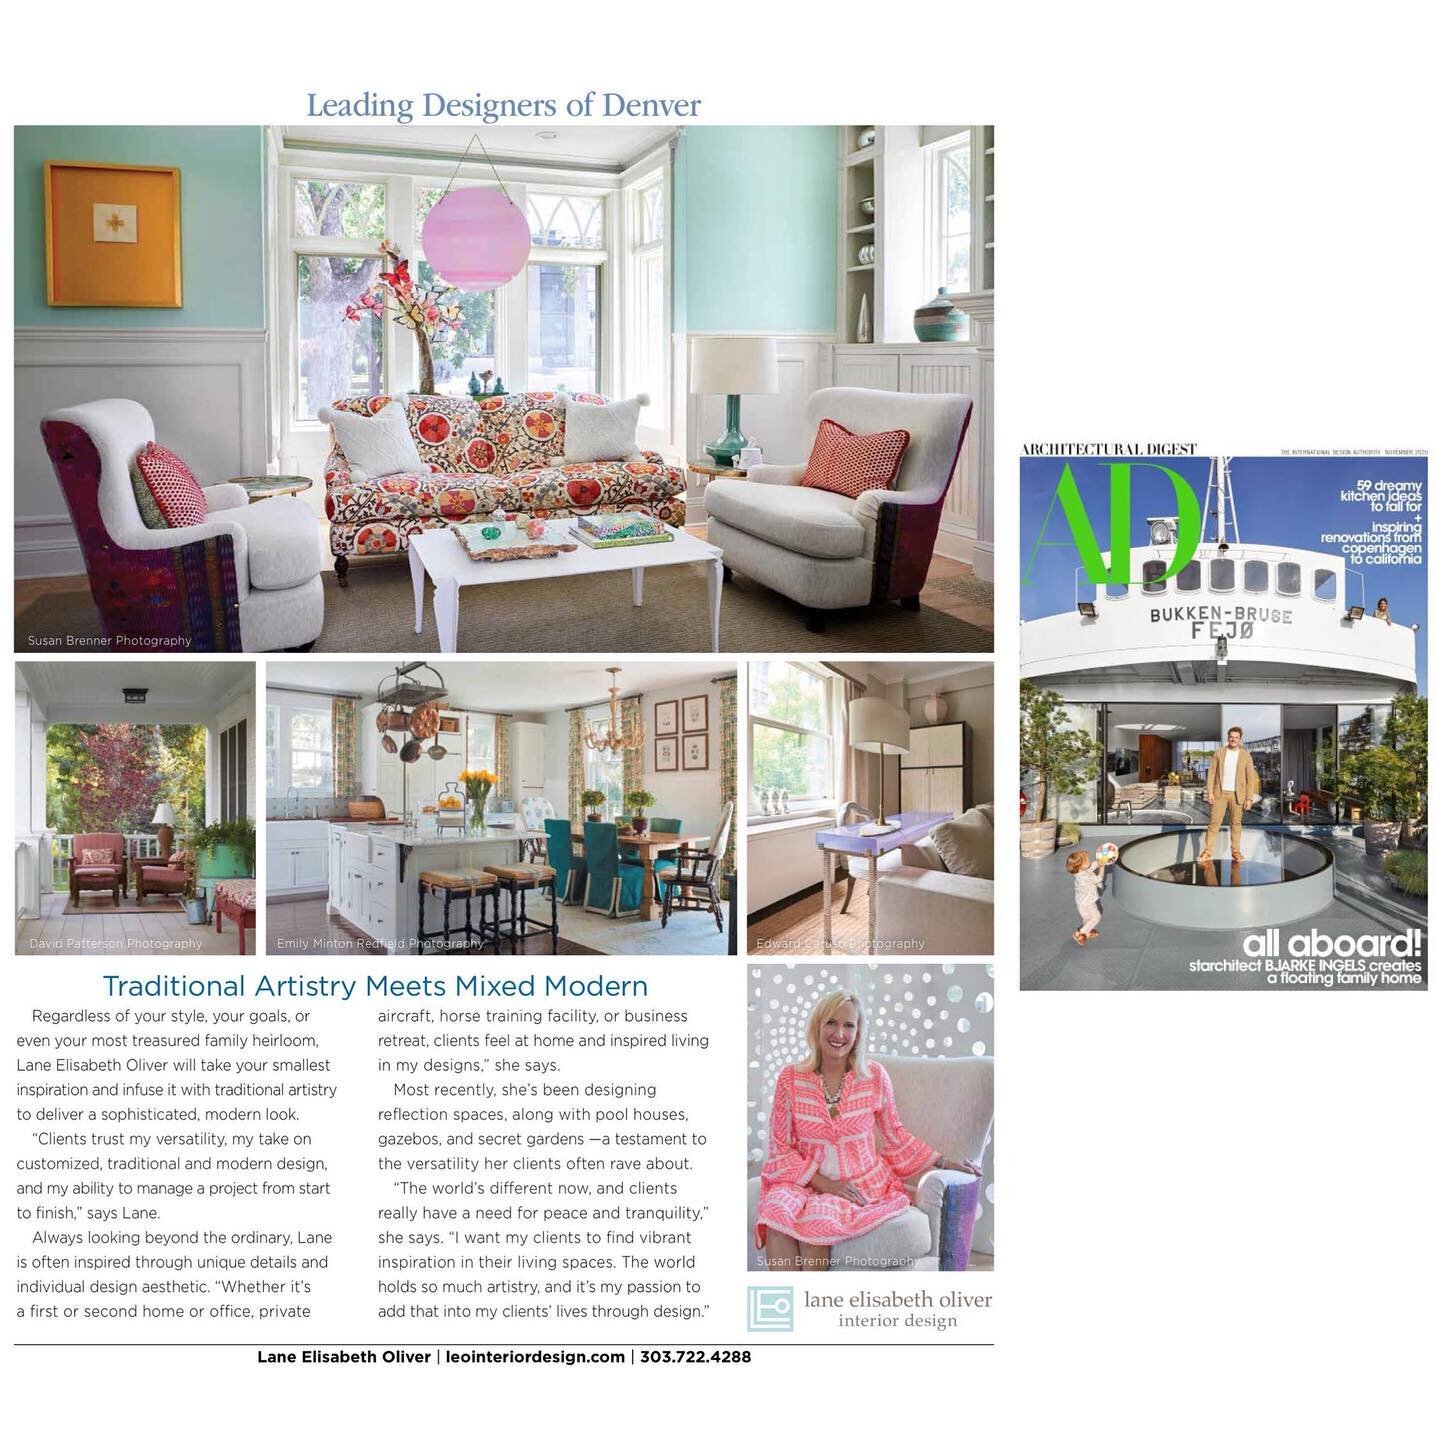 #HappyInteriors as seen in the 2020 Architectural Digest November Issue for Colorado subscribers. 

#lockdownluxury #kickthecovidblues #brunschwigandfils #anthropologie #customironies #visualcomfort #forgloir #devotiontwins #sapanadreams #paulnewmyer